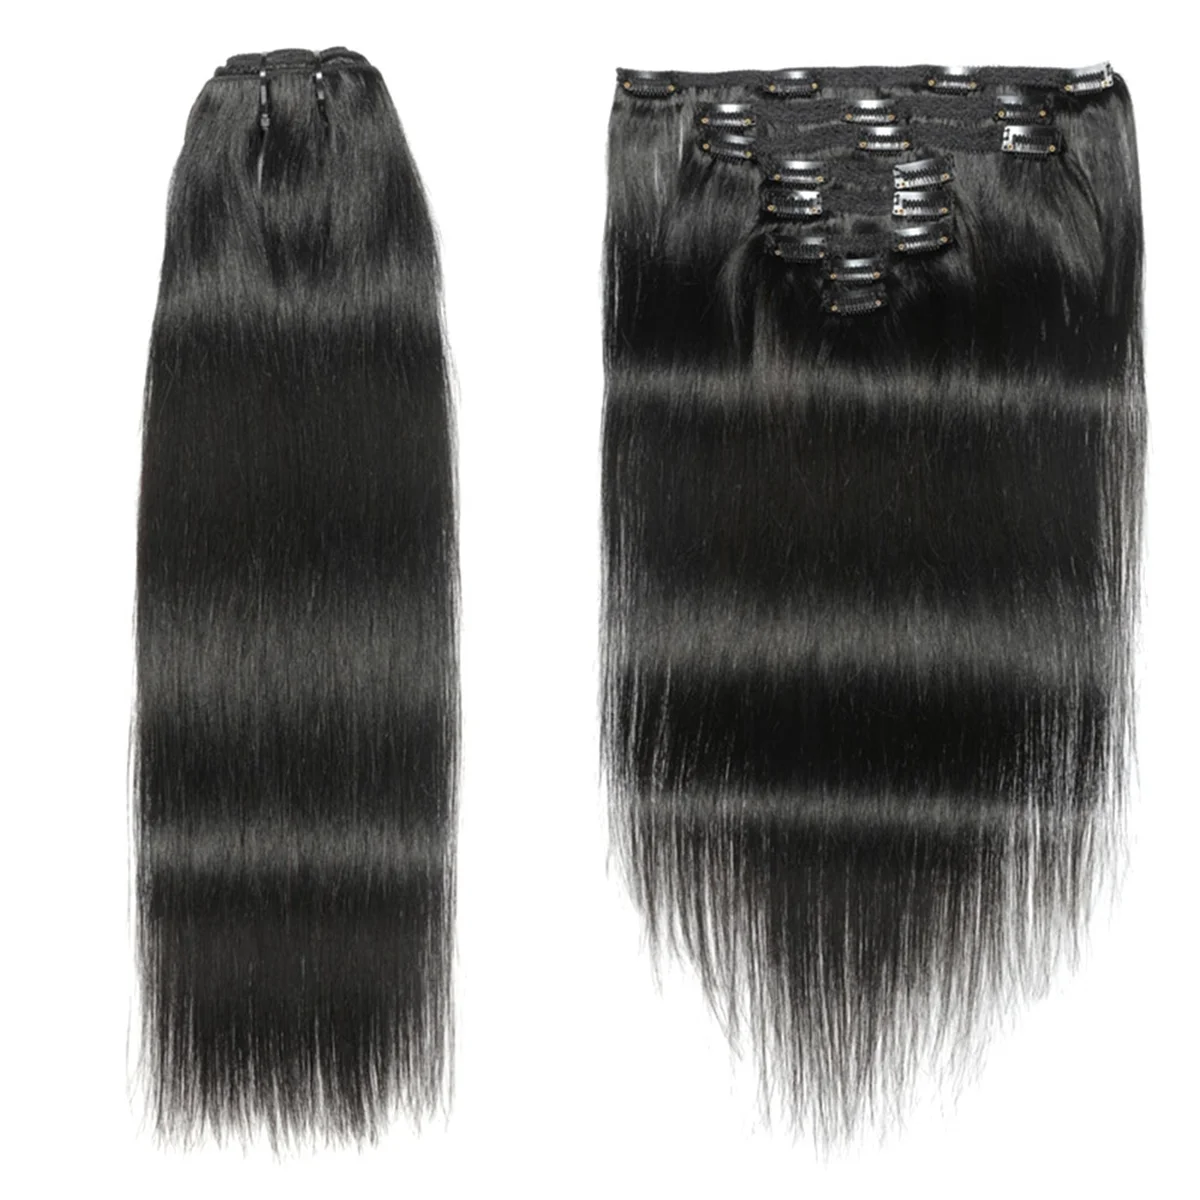 

18Inch Clip in Extensions Human-Hair Clip Straight Hair Extensions Seamless Skin Weft Clip-on Hair Pieces